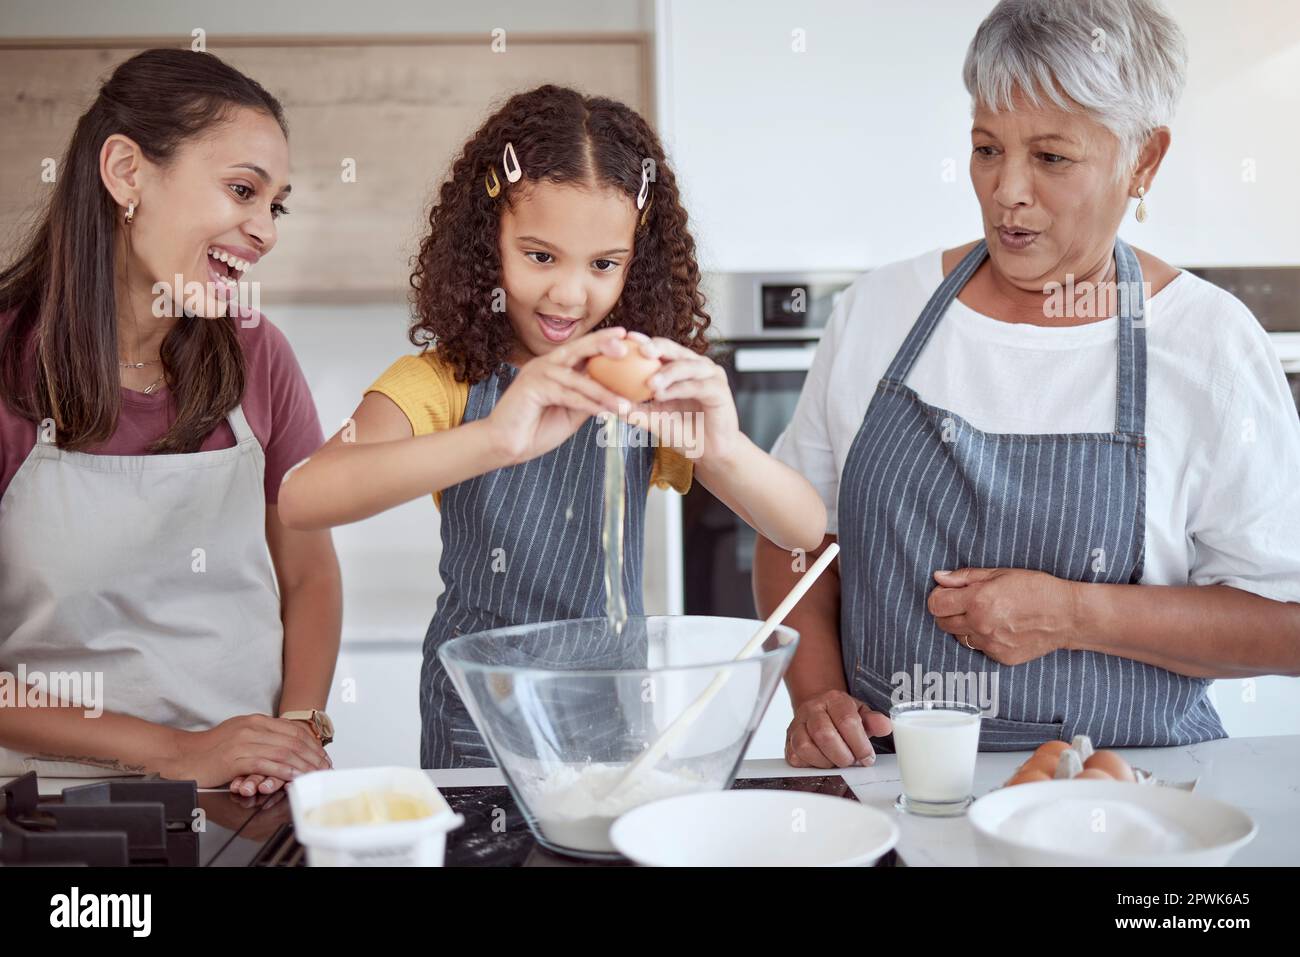 https://c8.alamy.com/comp/2PWK6A5/happy-family-child-and-grandmother-cooking-in-kitchen-with-flour-and-egg-food-learning-to-make-a-cake-or-cookies-with-women-support-love-and-care-m-2PWK6A5.jpg